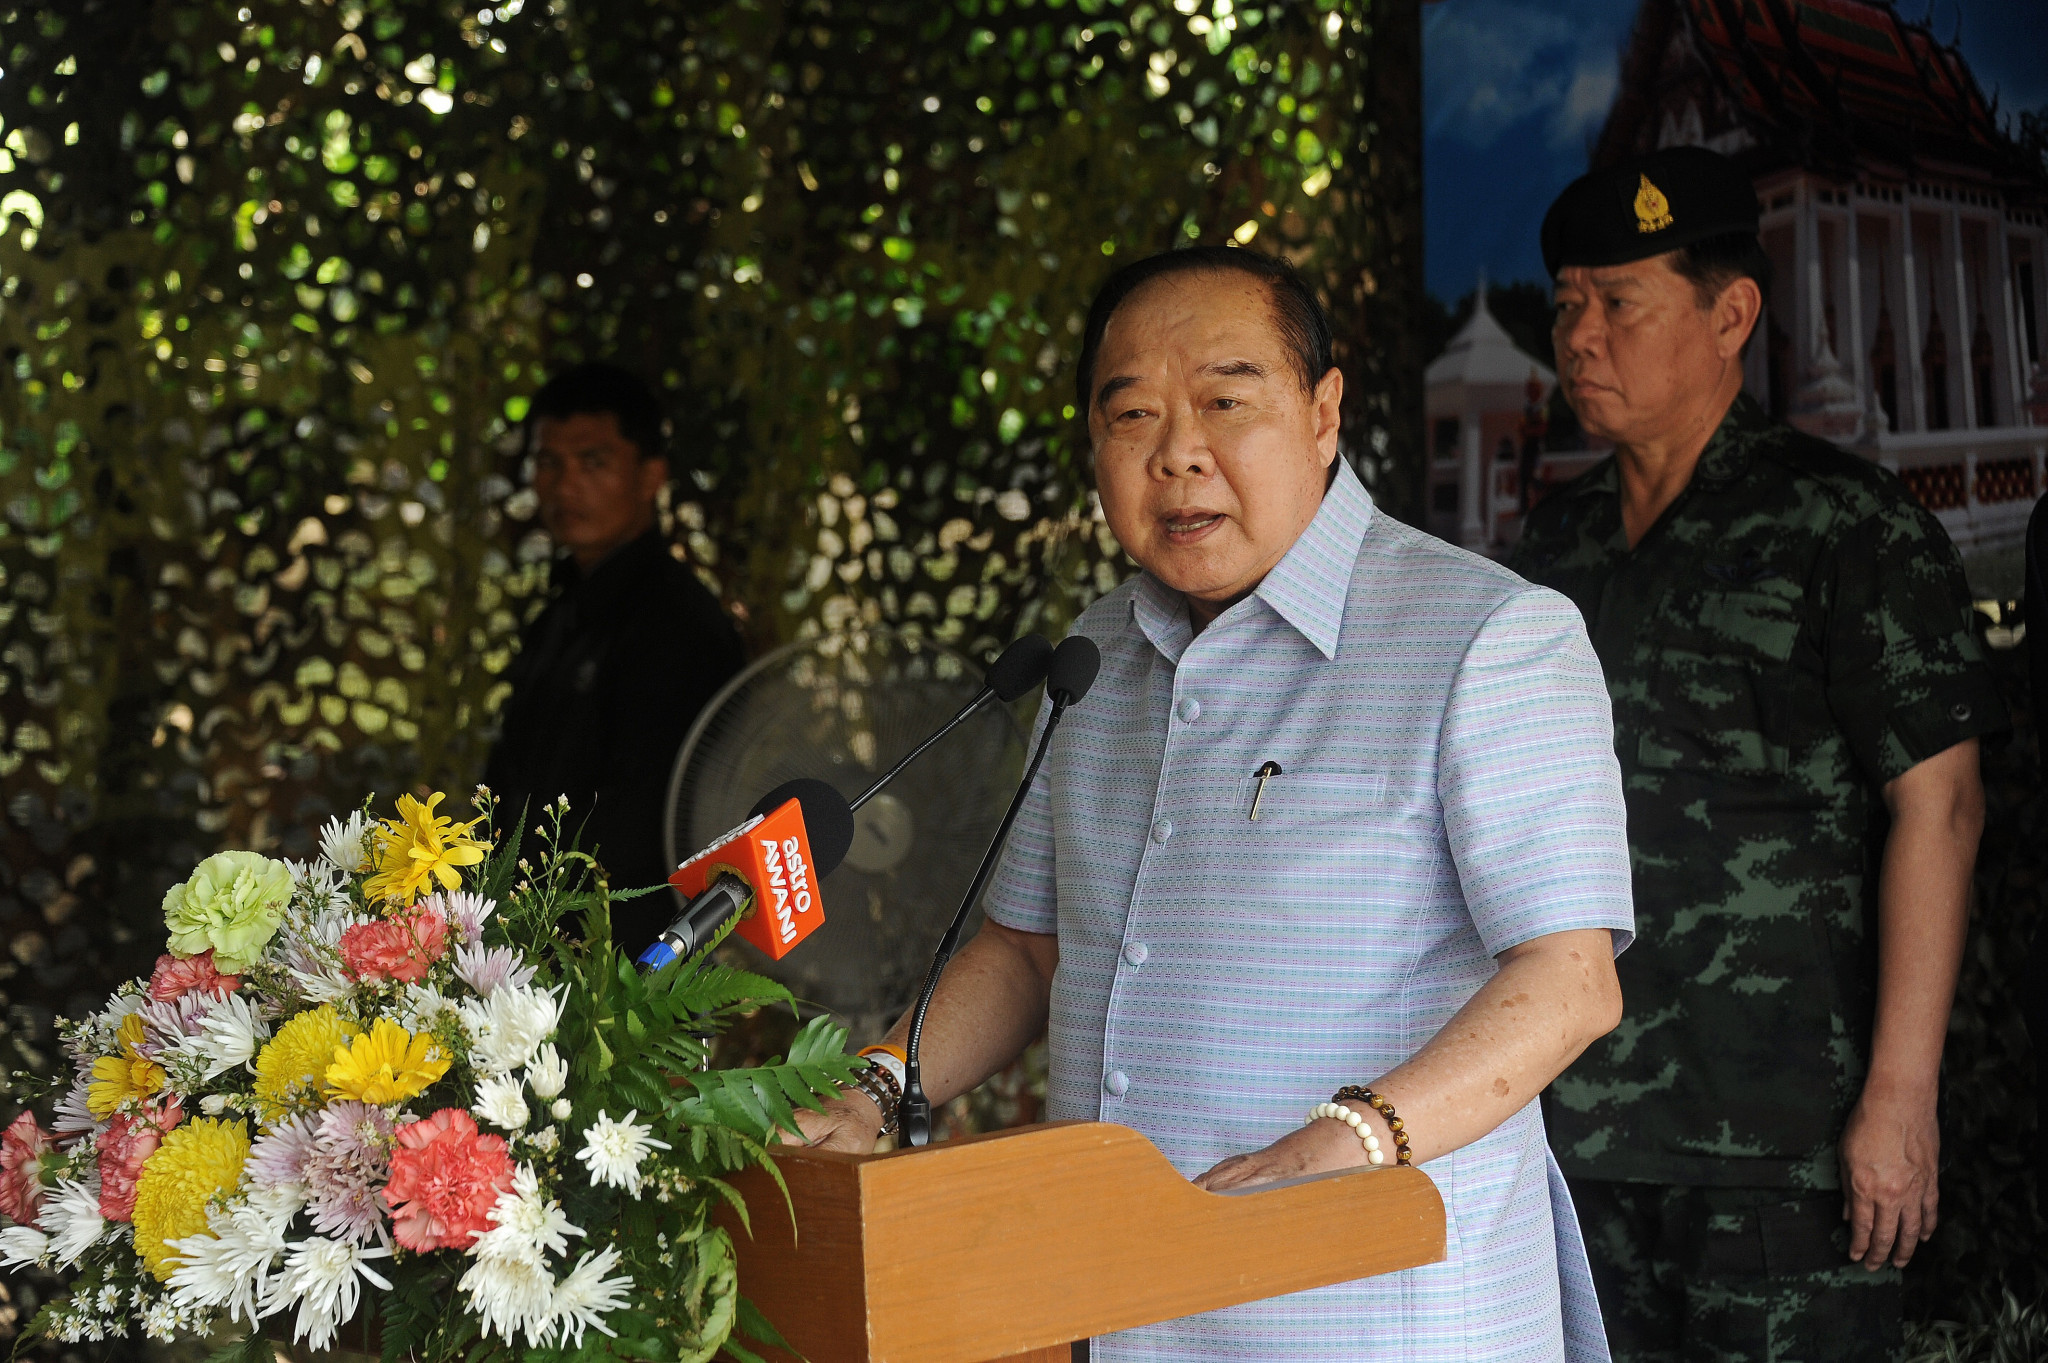 Prawit returns for second term as National Olympic Committee of Thailand President